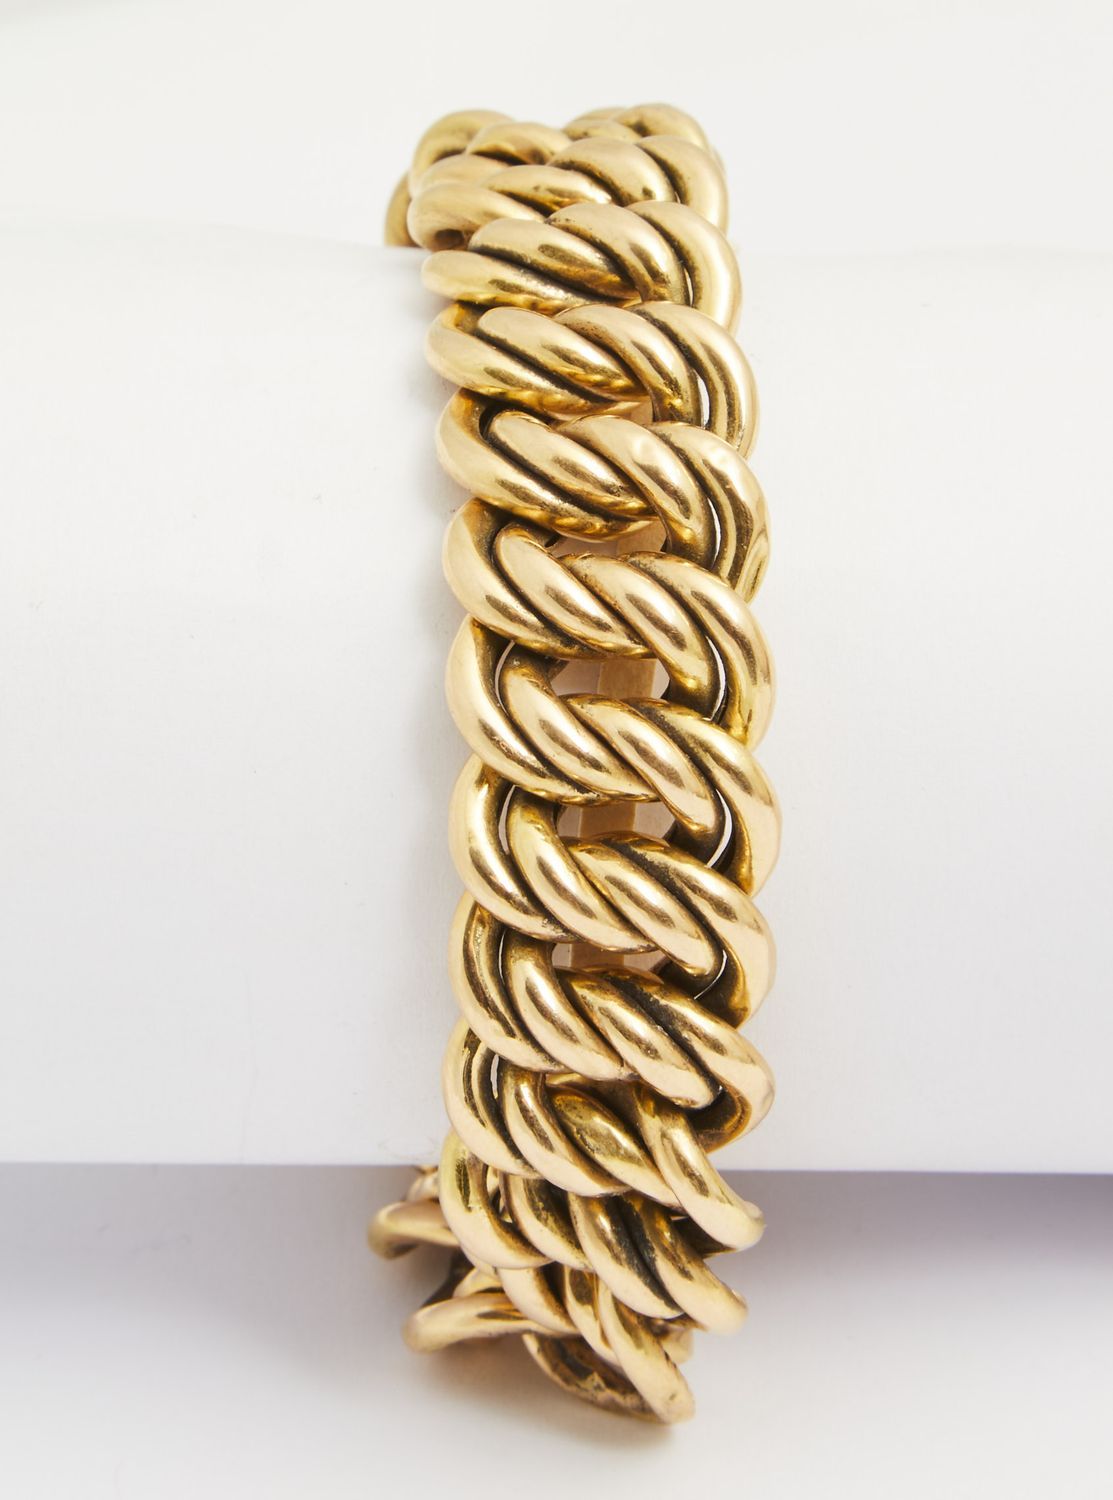 Null 122 Yellow gold bracelet with American mesh, wrist 19.5 cm, weight 36.4 g